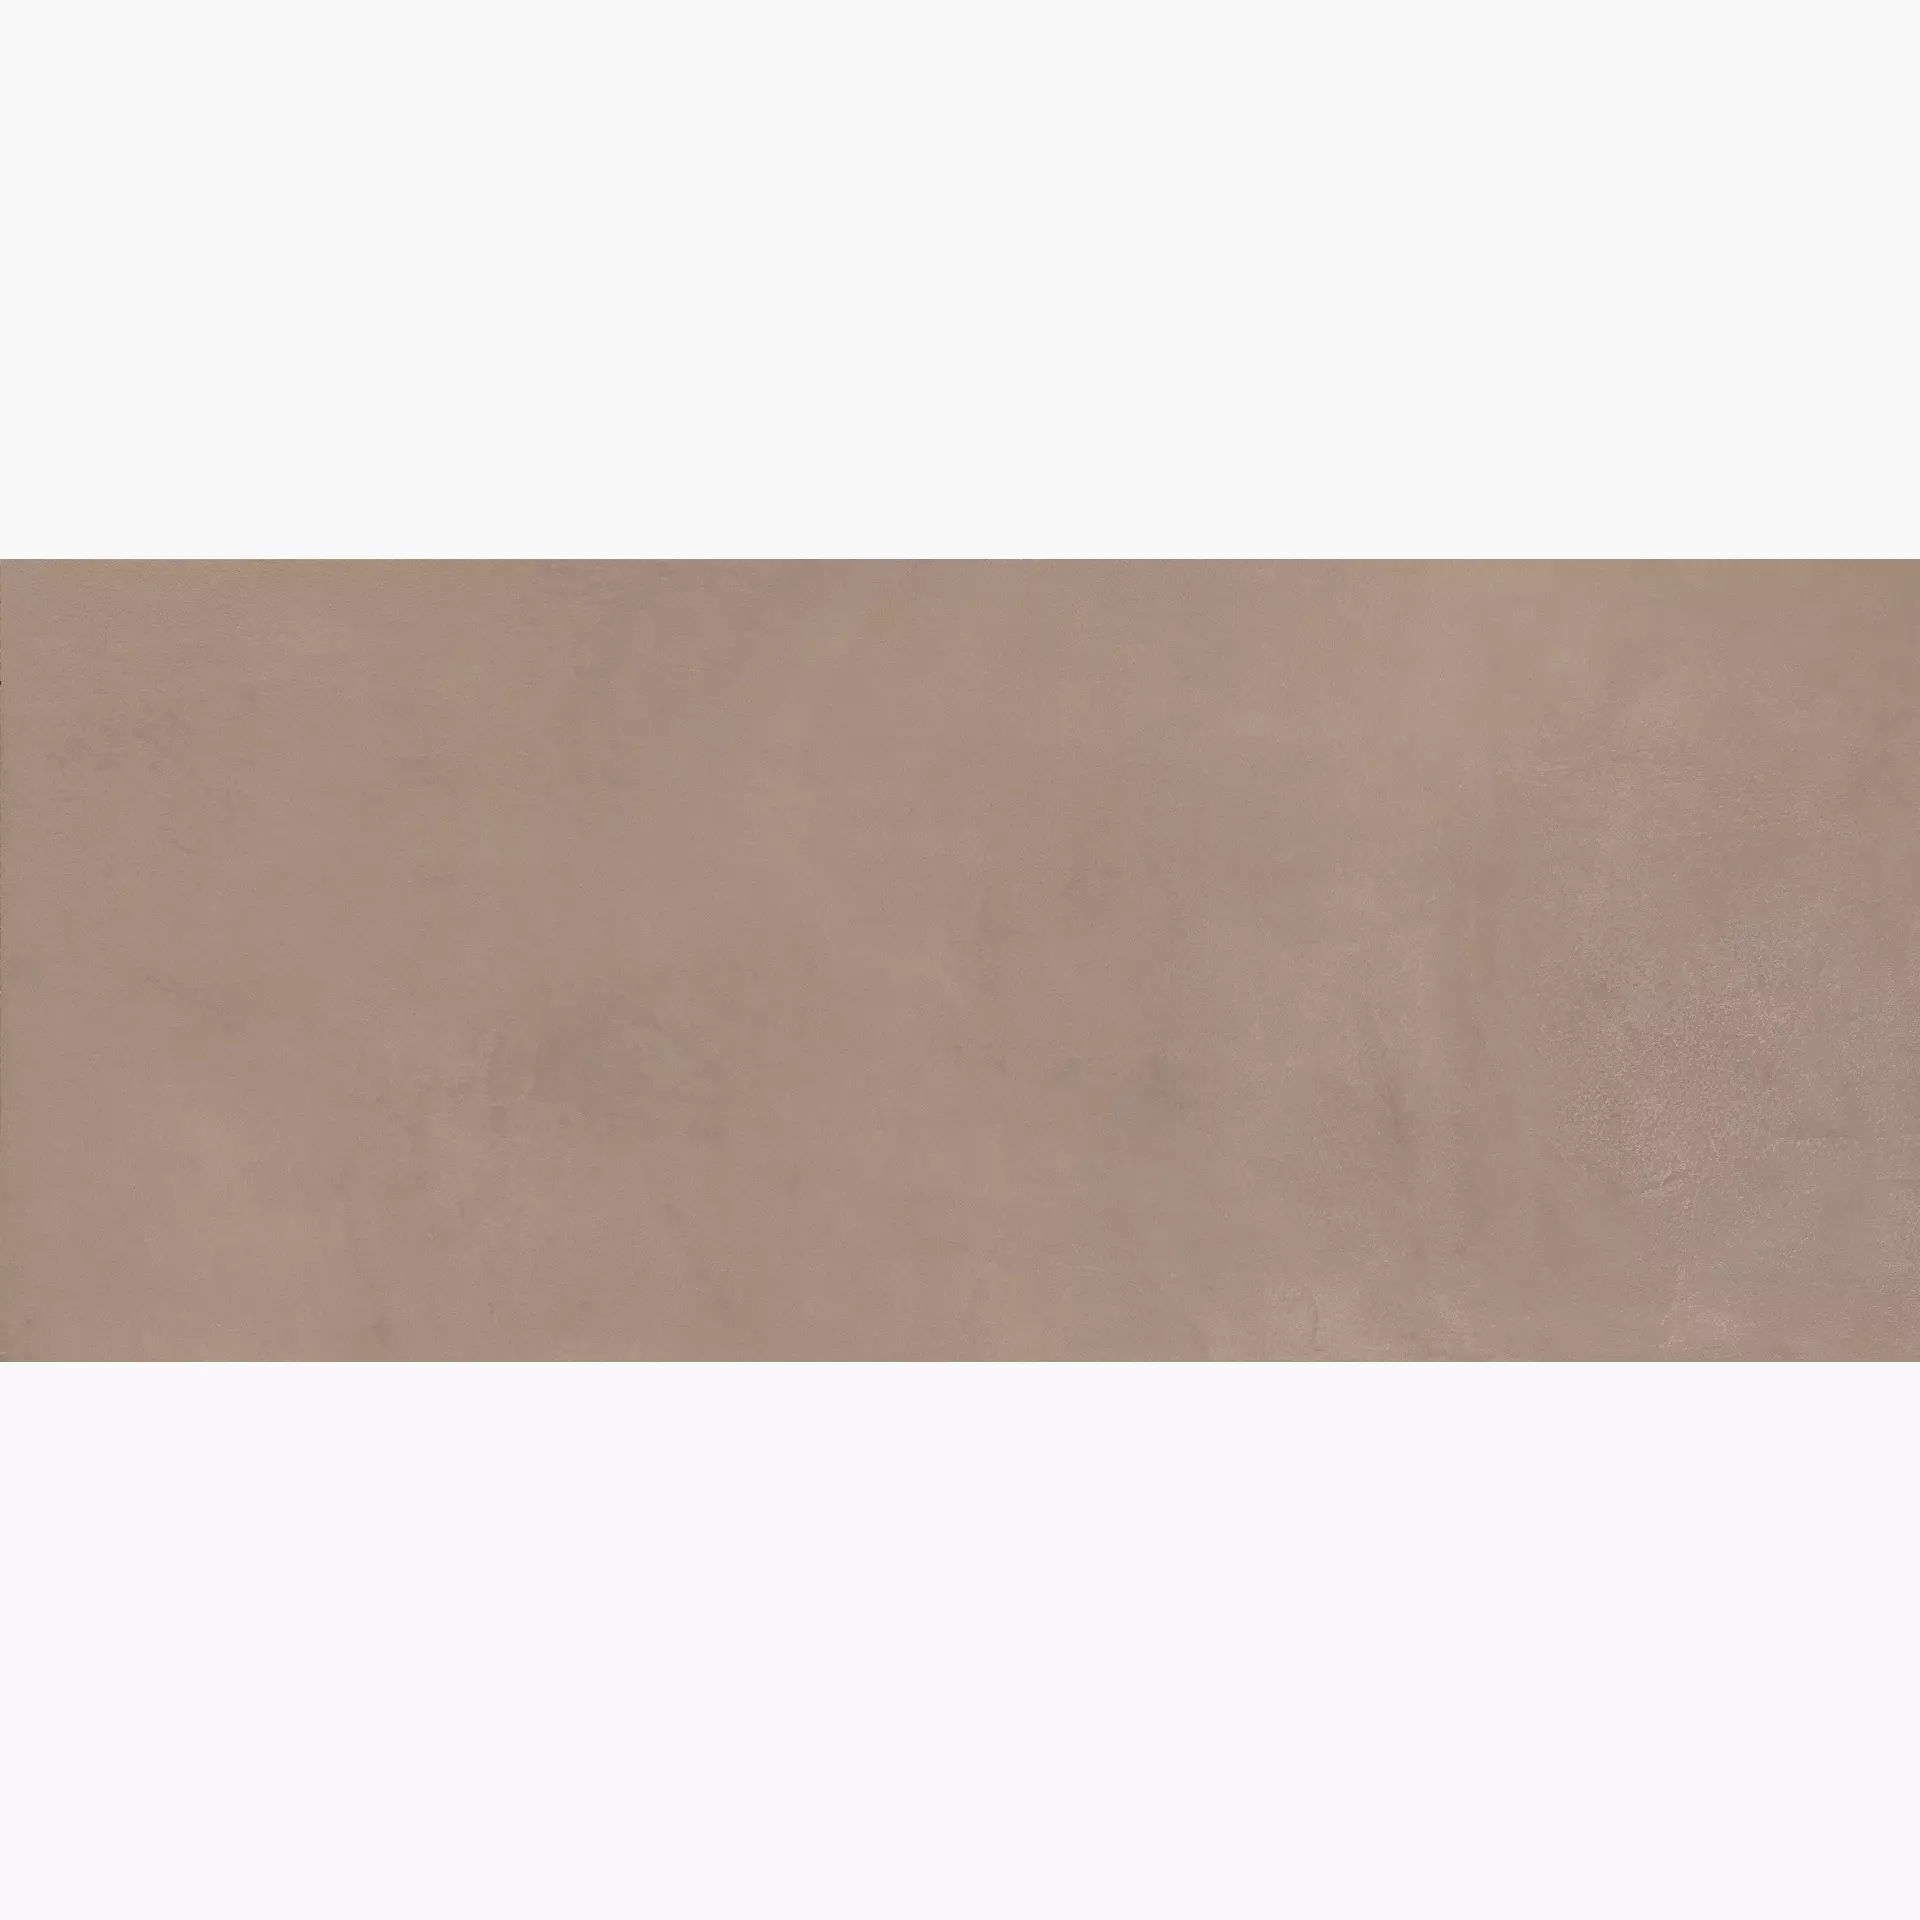 Supergres Colovers Wall Love Brown Naturale – Matt LBR5 50x120cm rectified 8,5mm